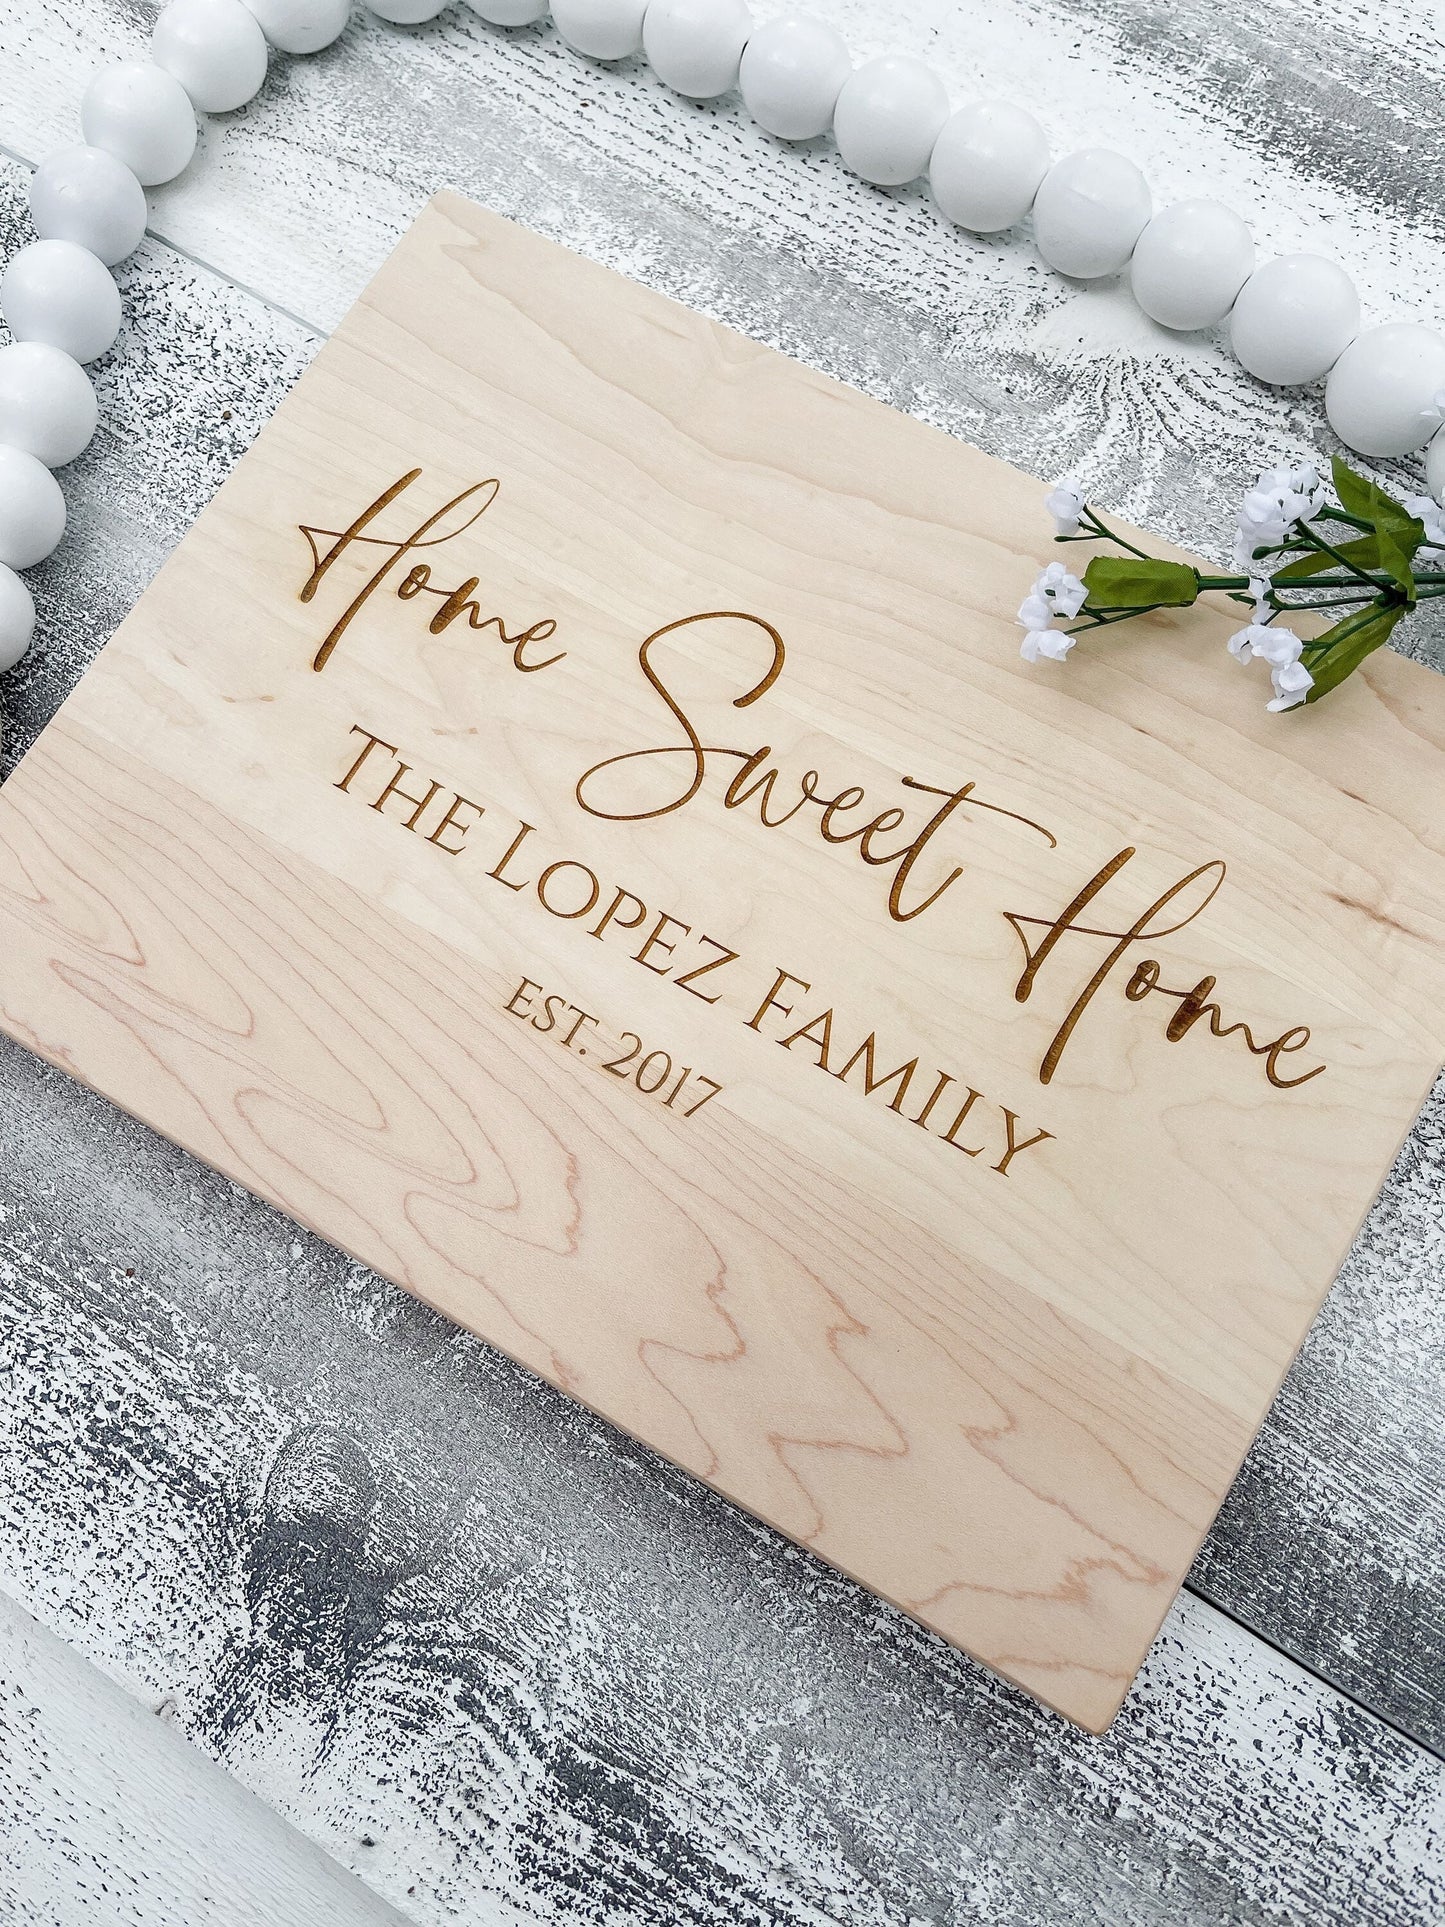 Custom Cutting Board, Home Sweet Home, Personalized Cutting Board, Realtor Closing Gift, First Home Gift, Housewarming Gift, New Home Gift